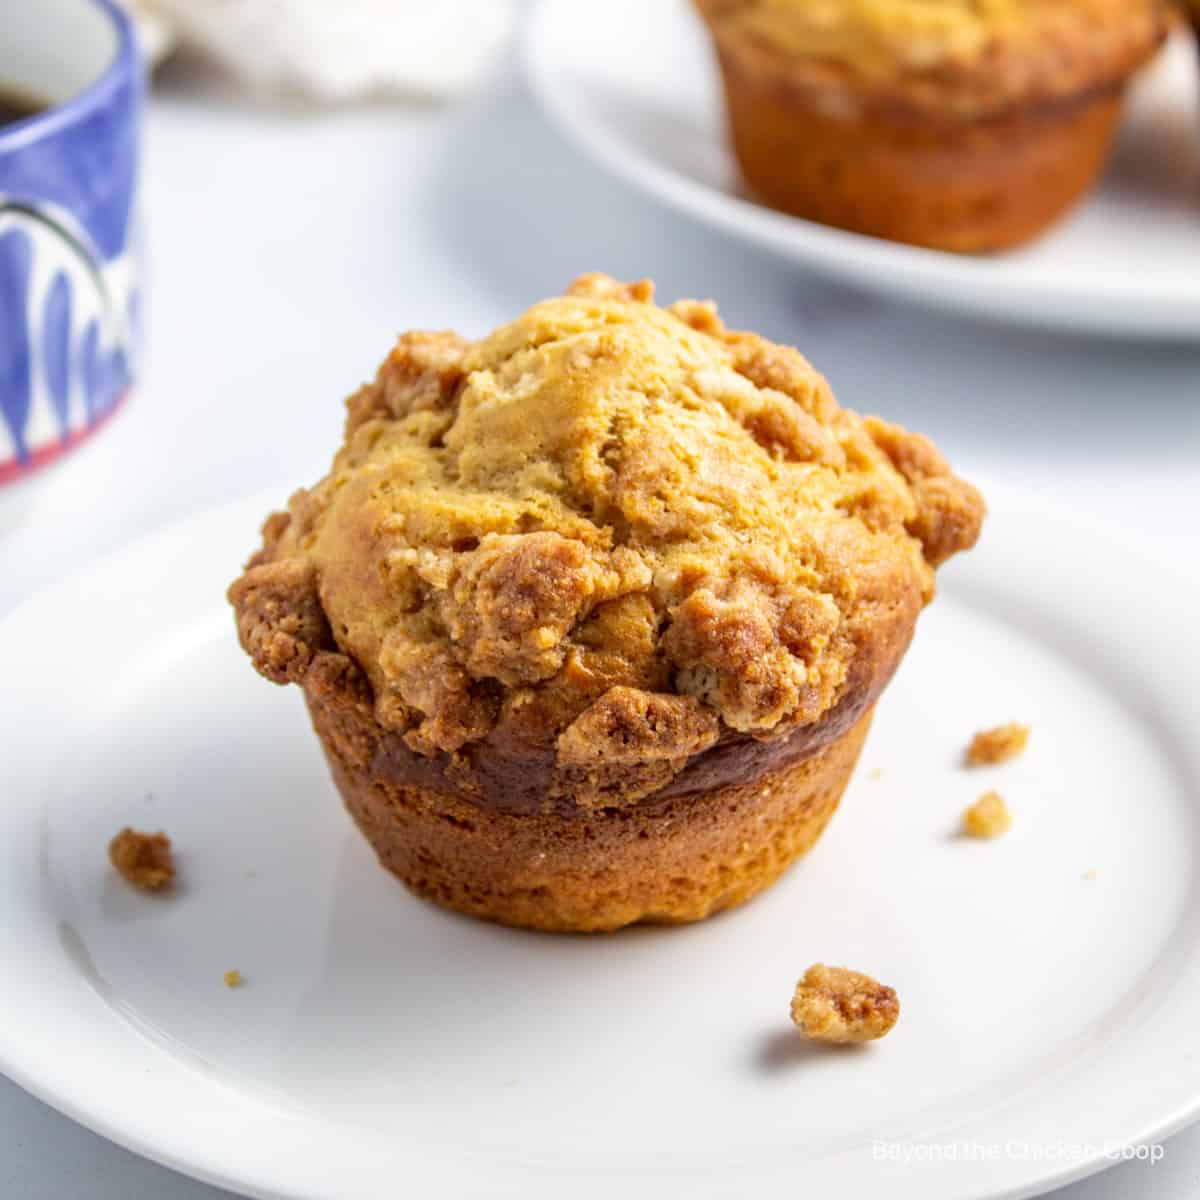 A coffee cake muffin on a plate.